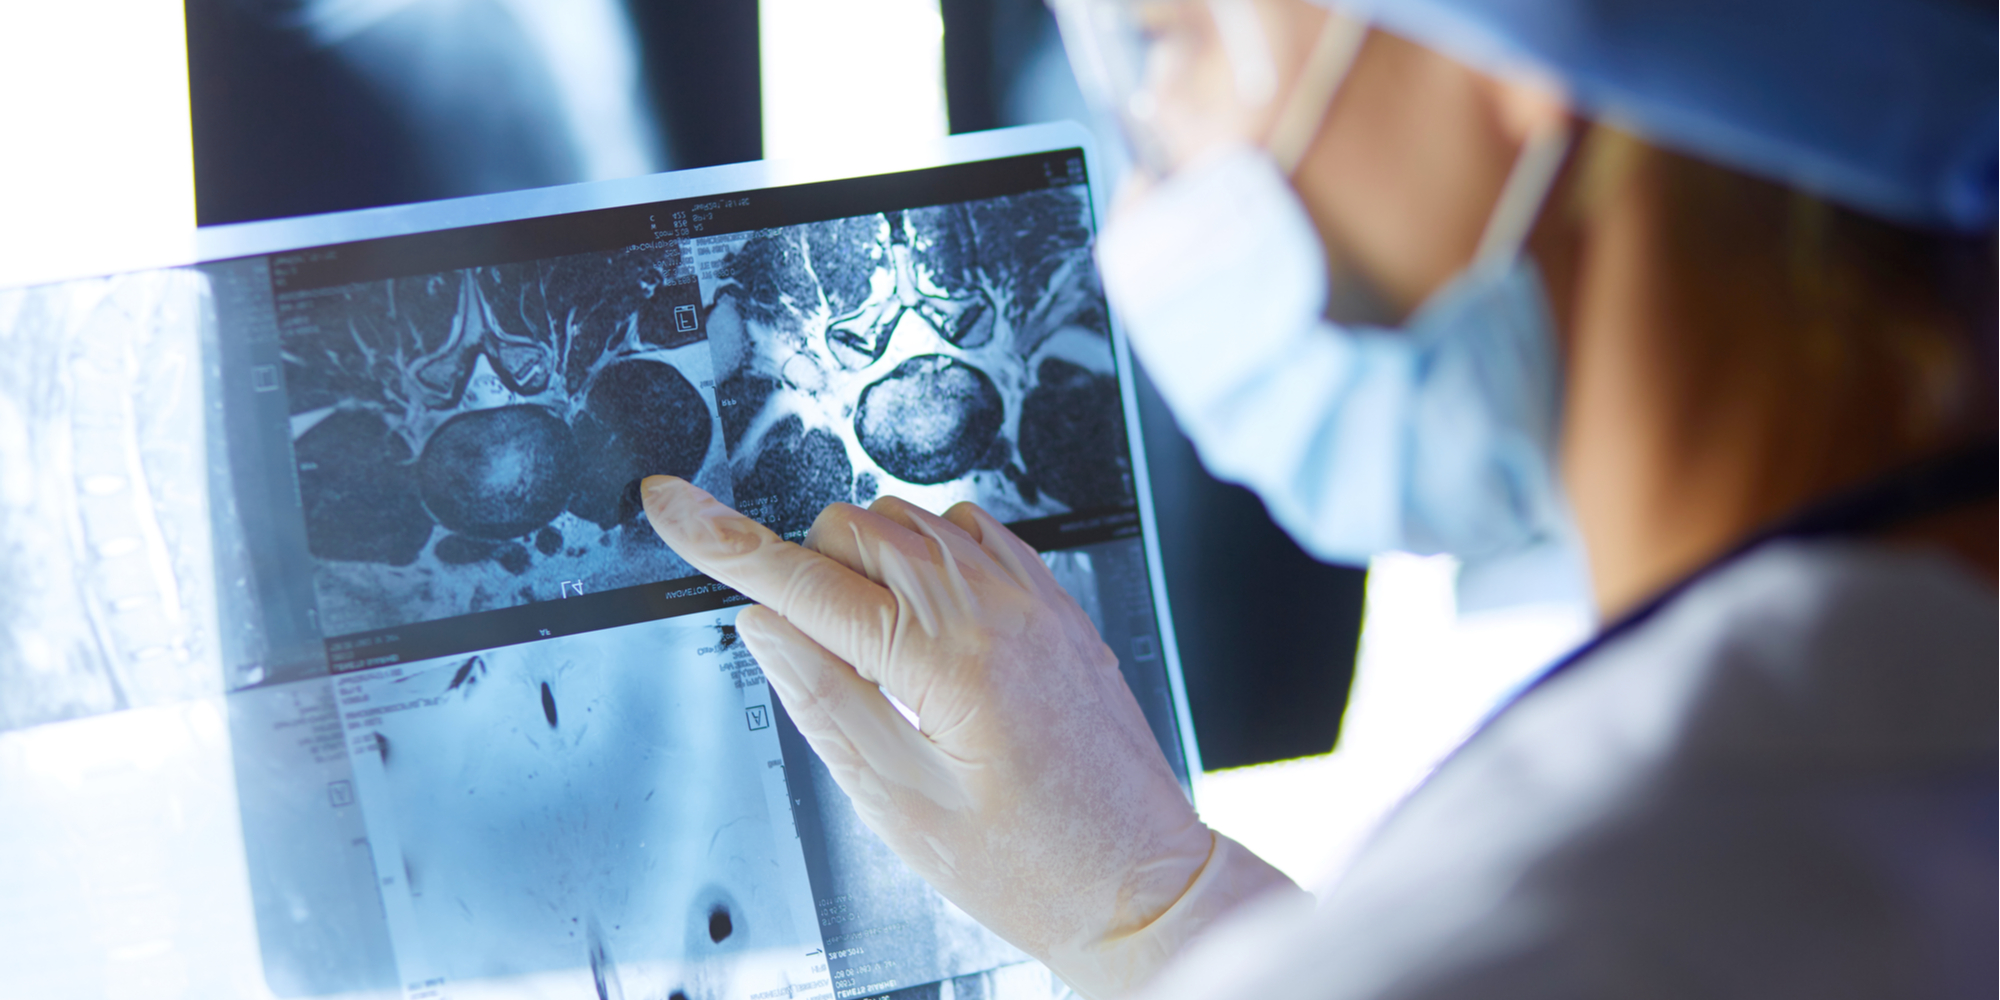 Supporting Biotech and Pharma Companies Using Imaging Endpoints in Clinical Trials